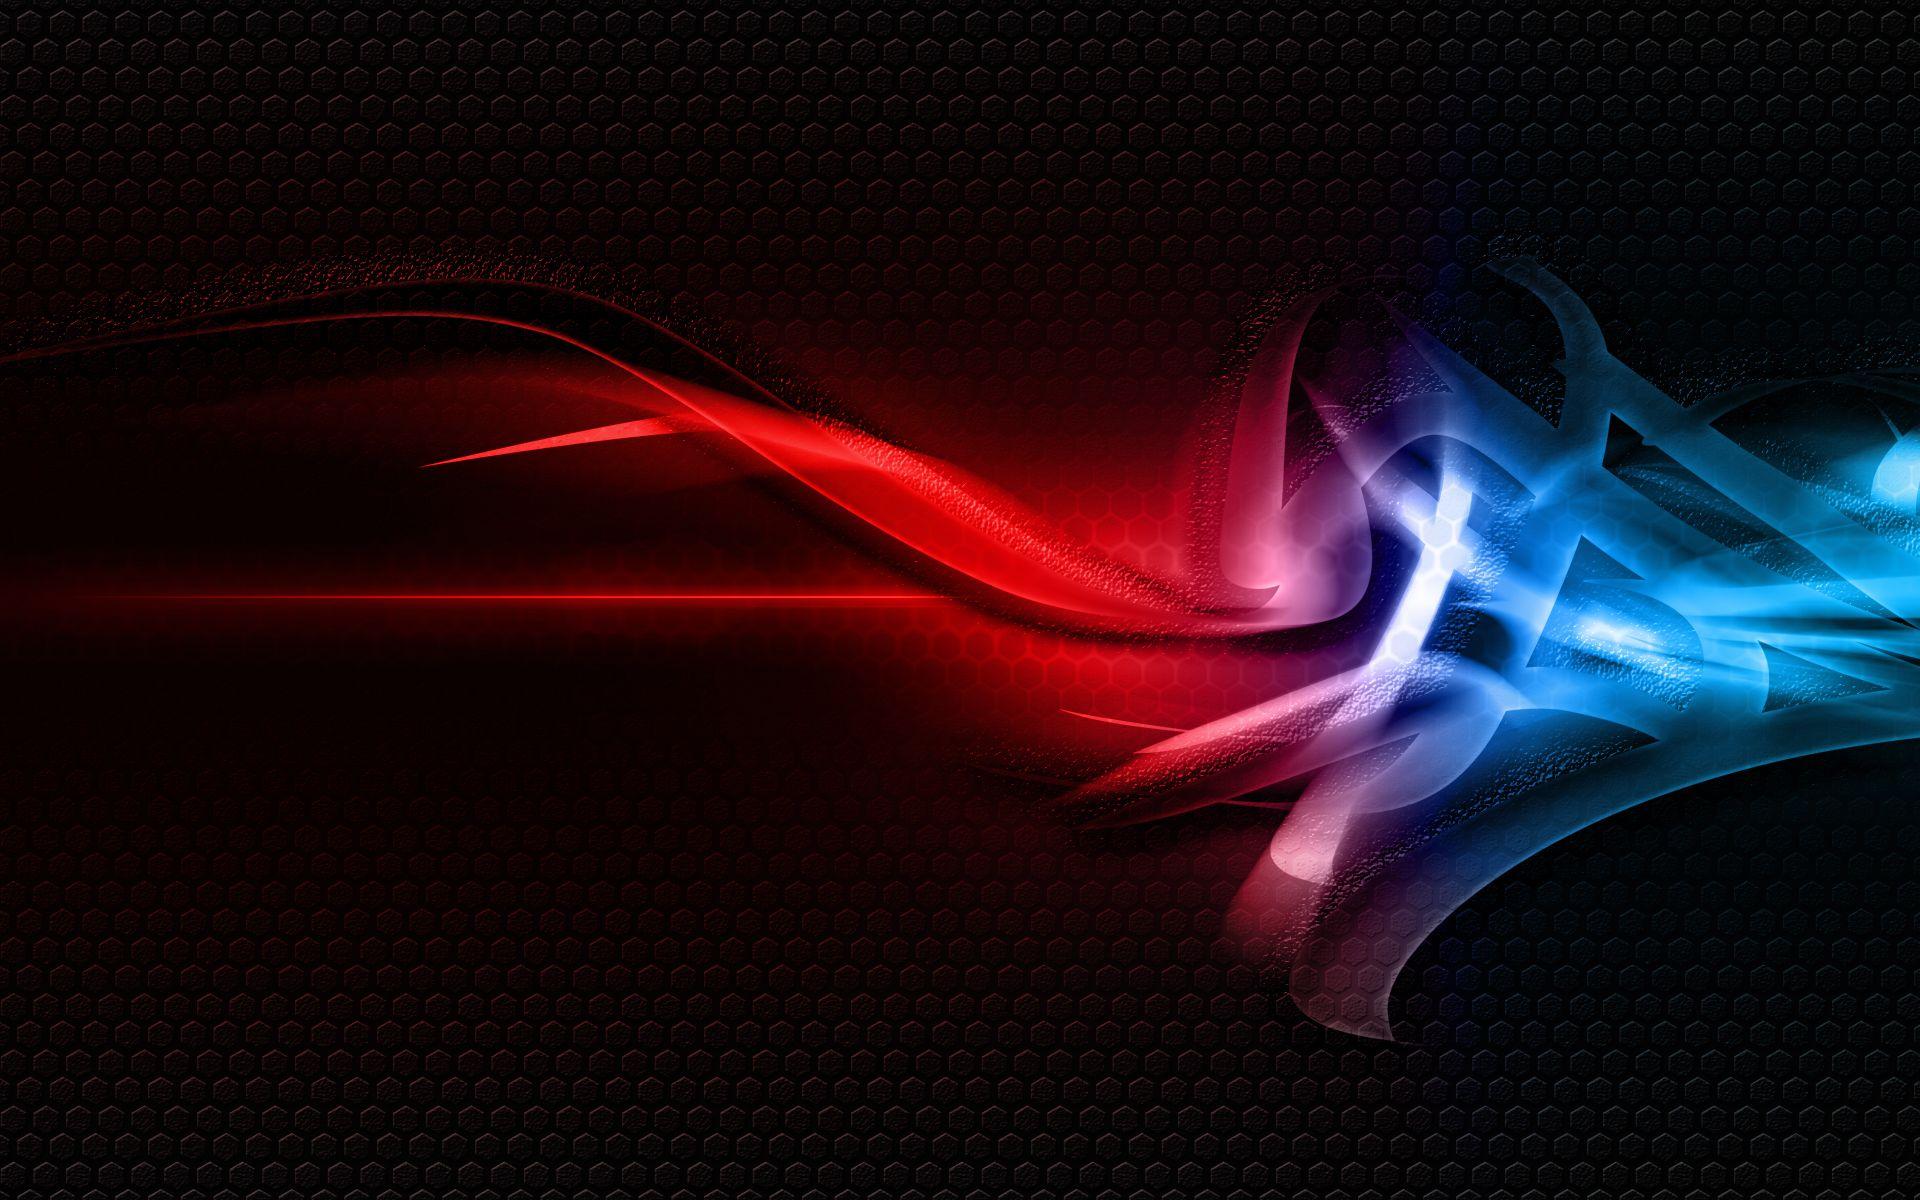 Download Red And Blue Abstract Wallpaper 1920x1200. Full HD